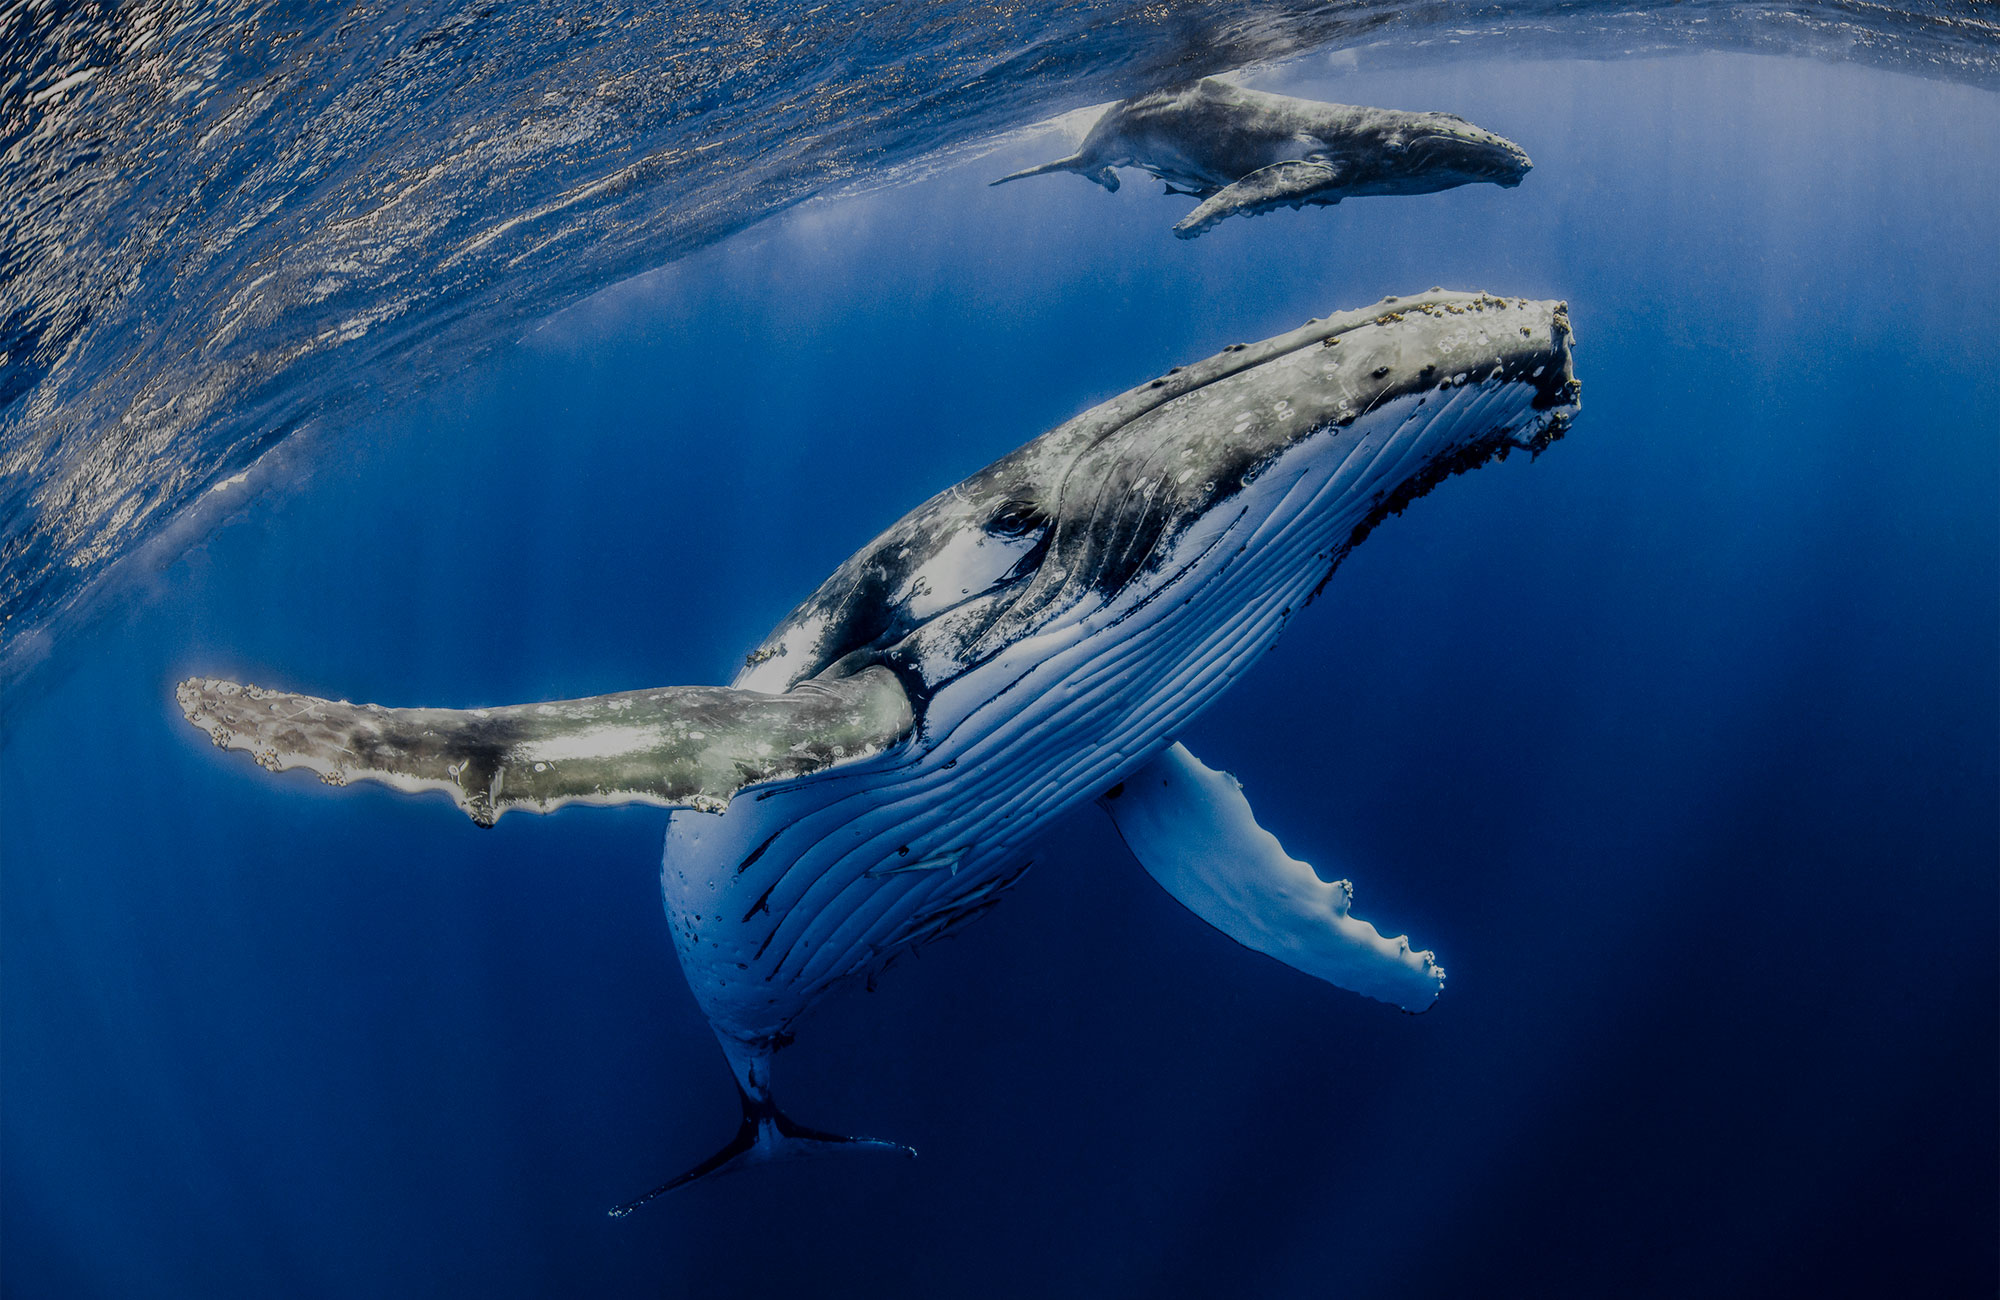 A humpback whale mother and calf swim in deep blue ocean water.